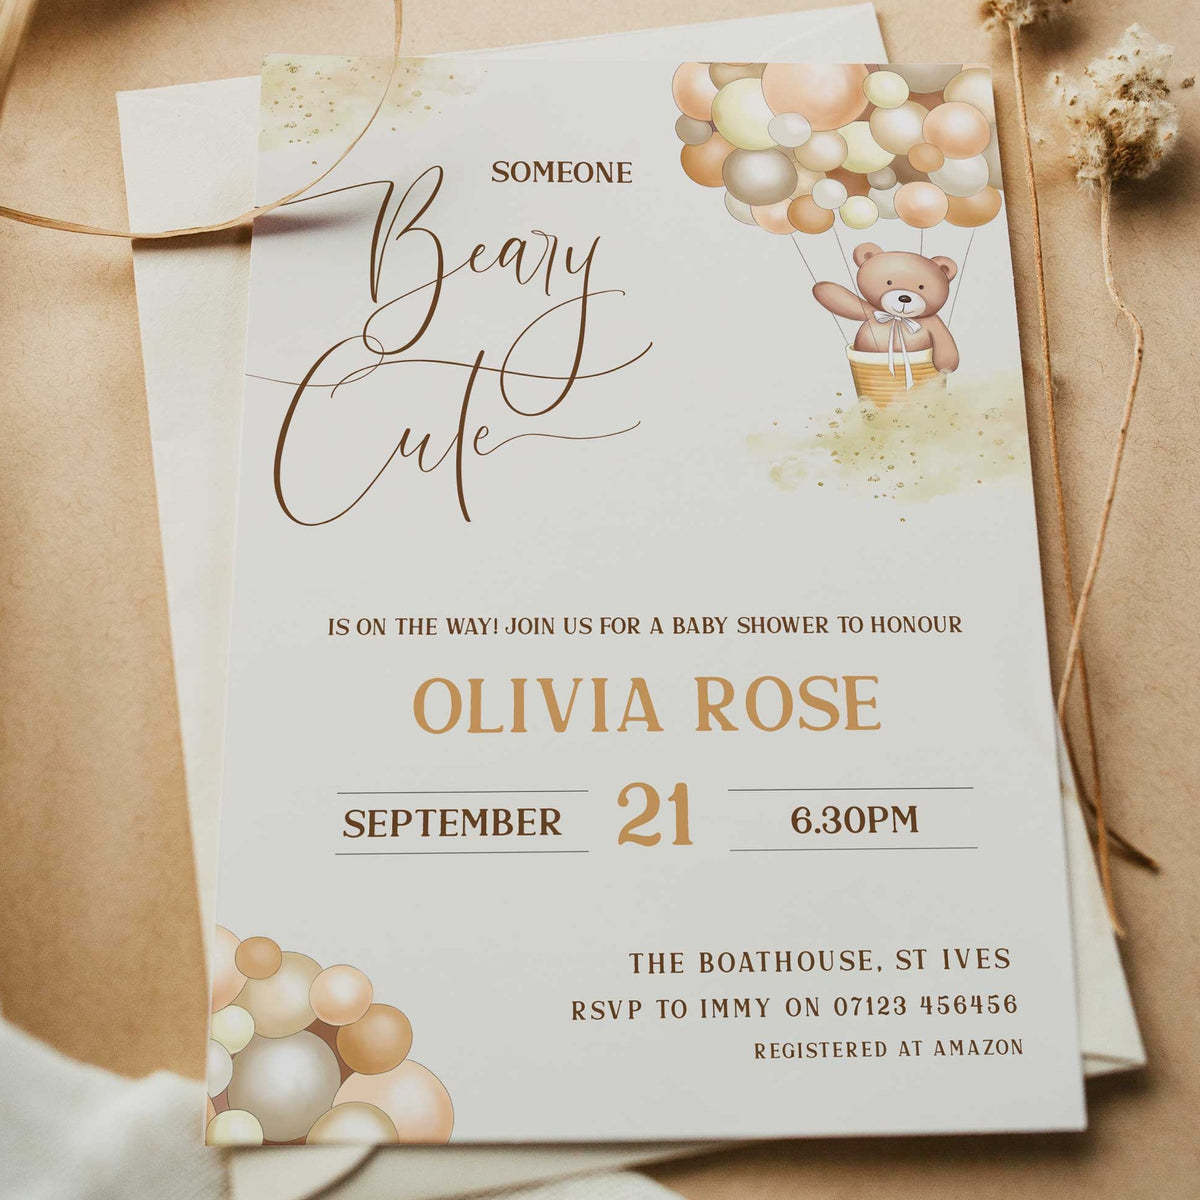 Printable baby shower invitation  with a teddy bear, we can nearly wait design